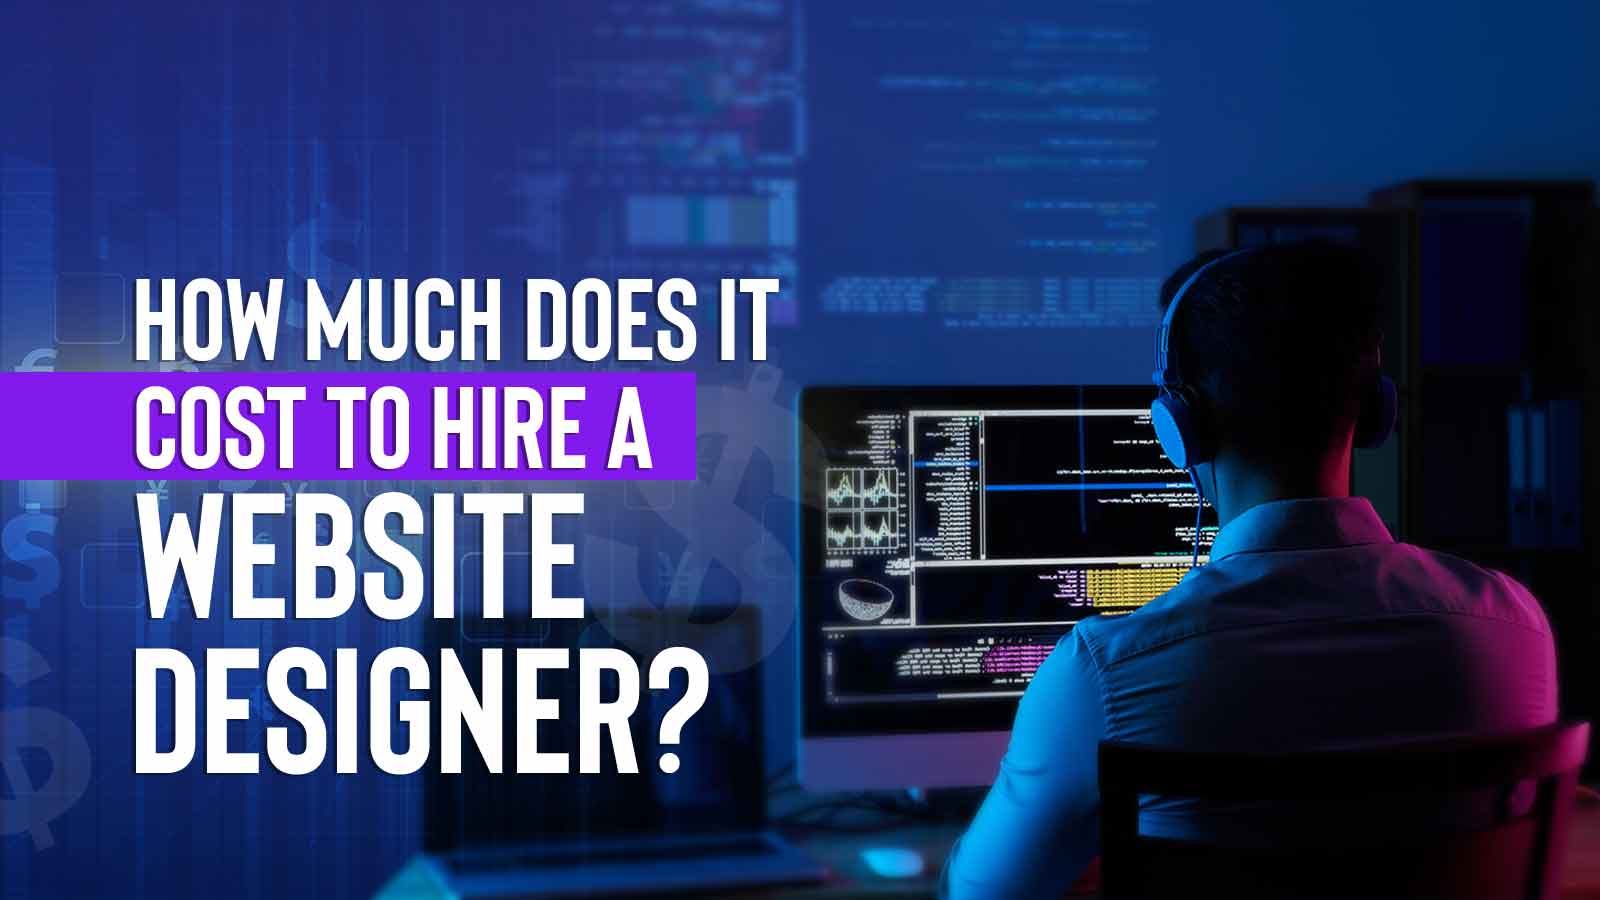 How Much Does It Cost To Hire A Website Designer? In Brief